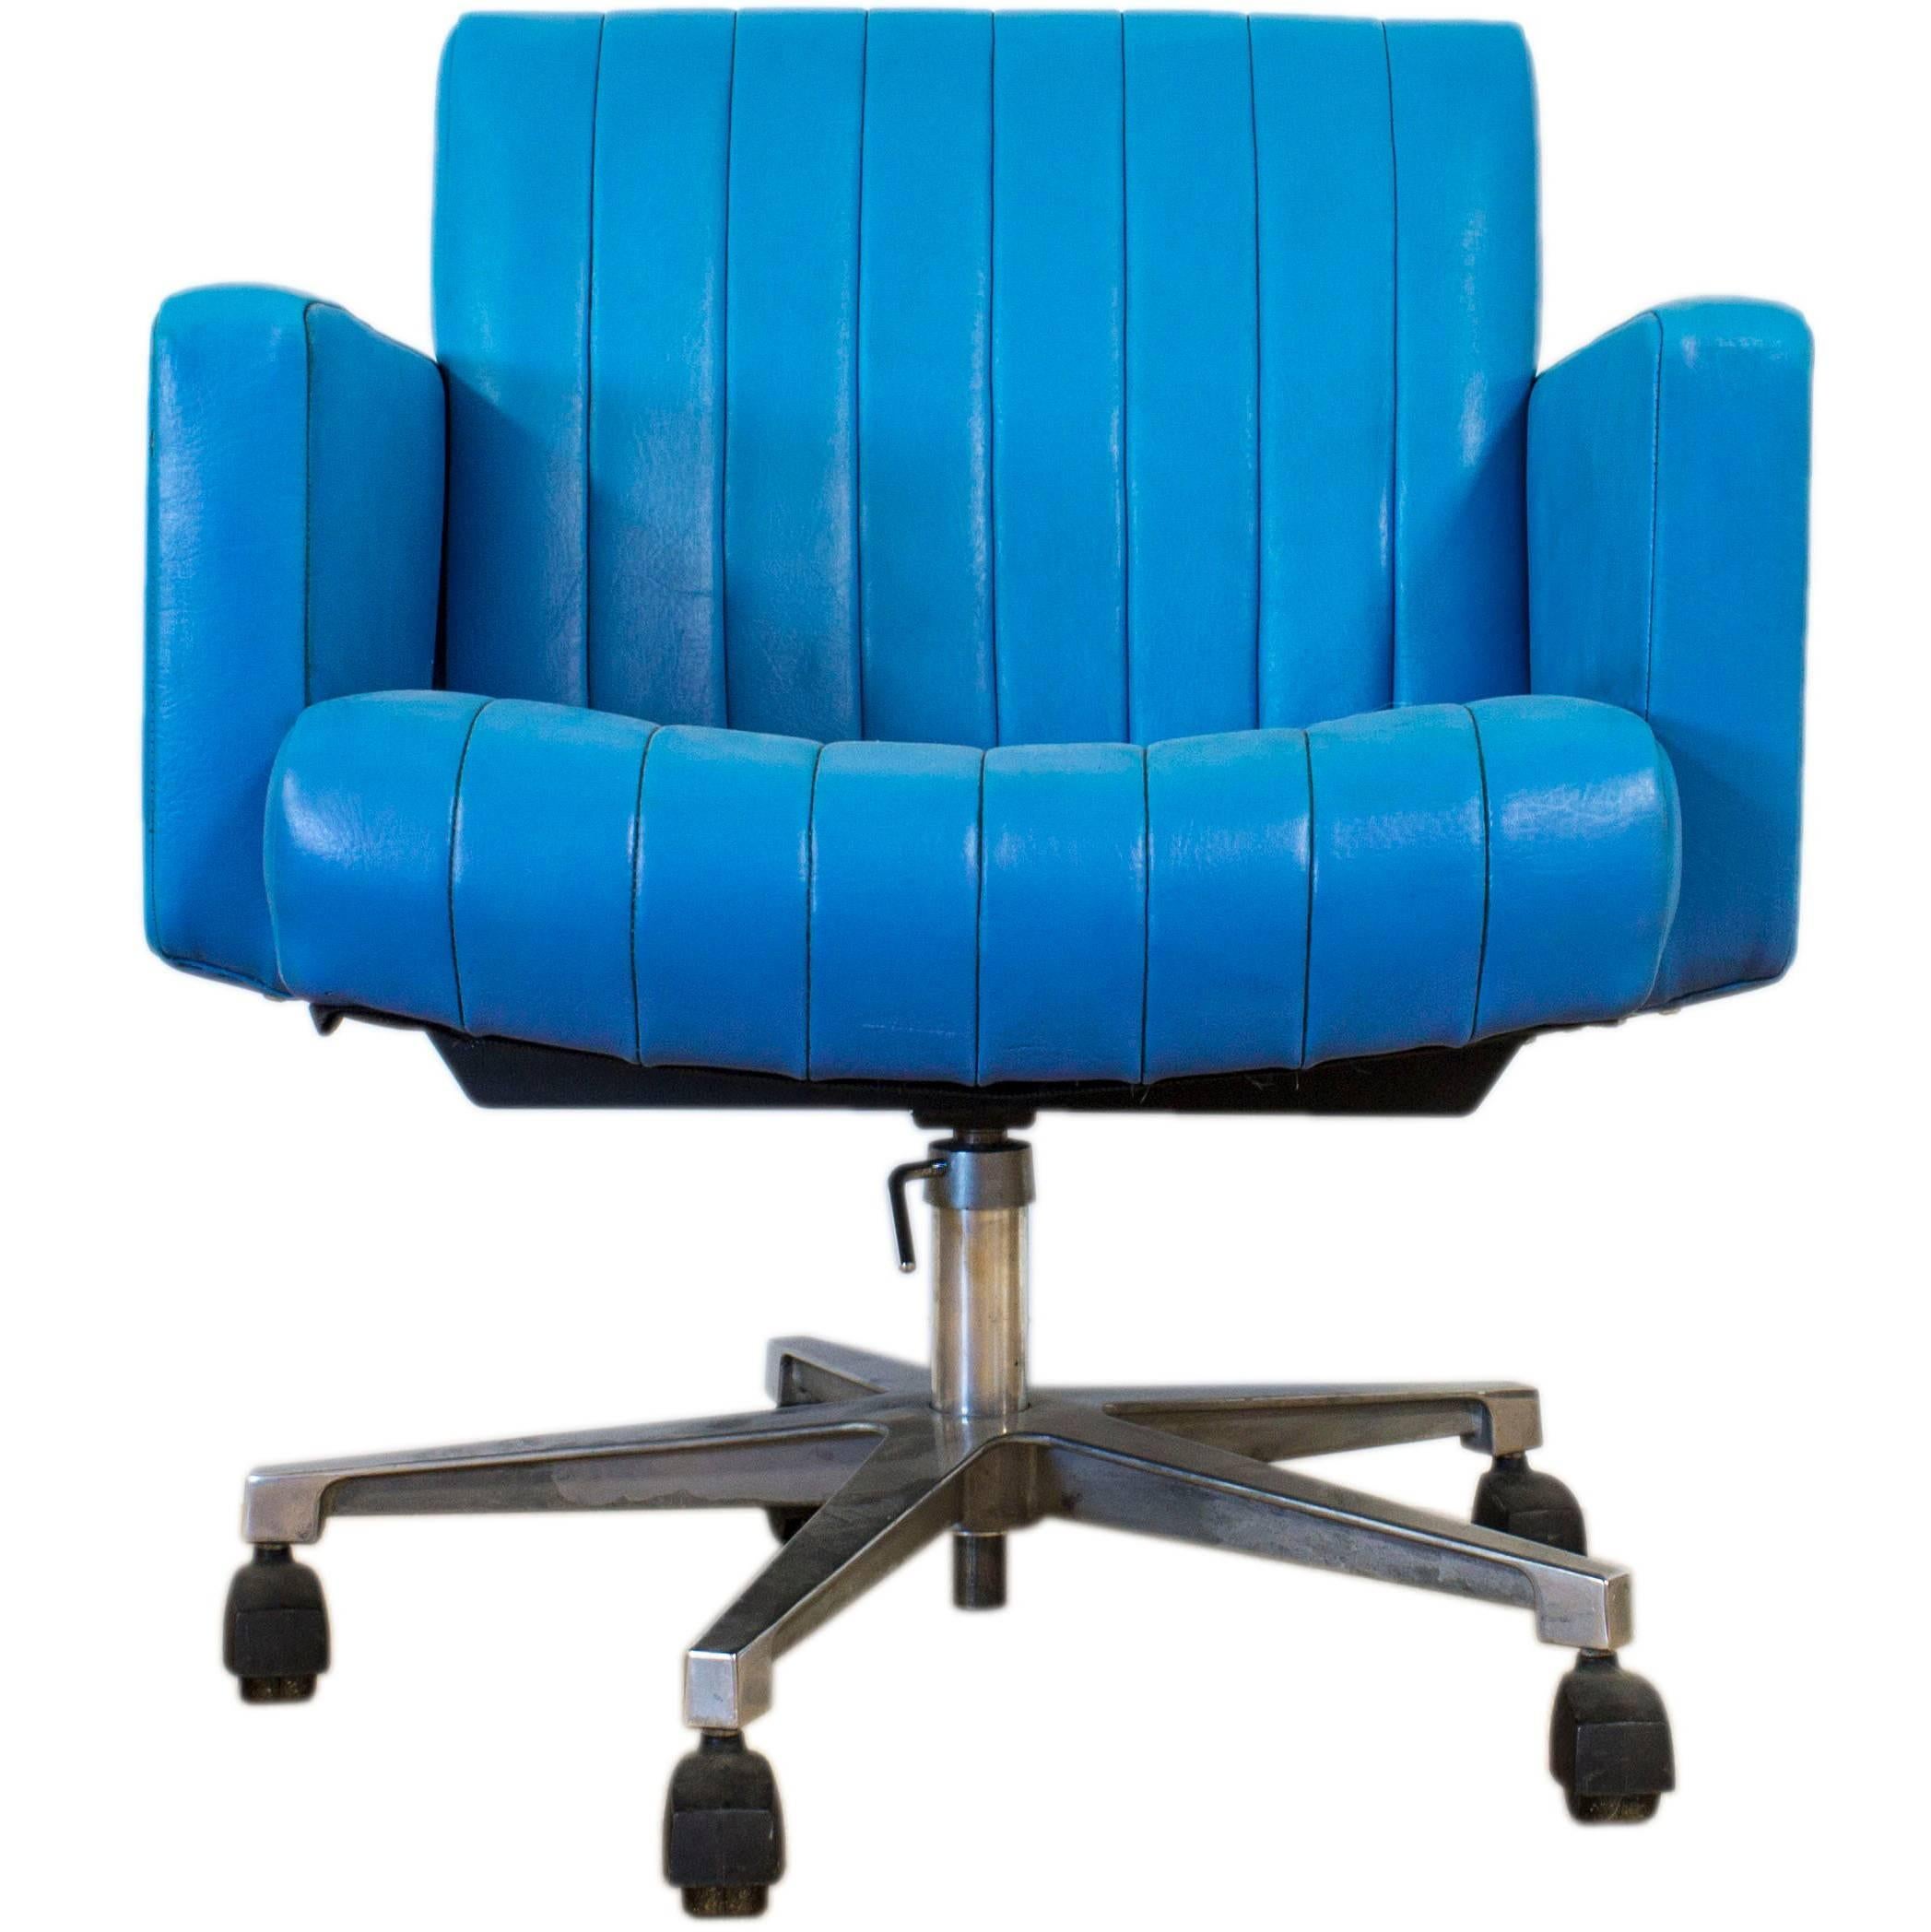 Turquoise Leather Swivel Armchair Desk Chair Retro G Plan Eames Era For Sale